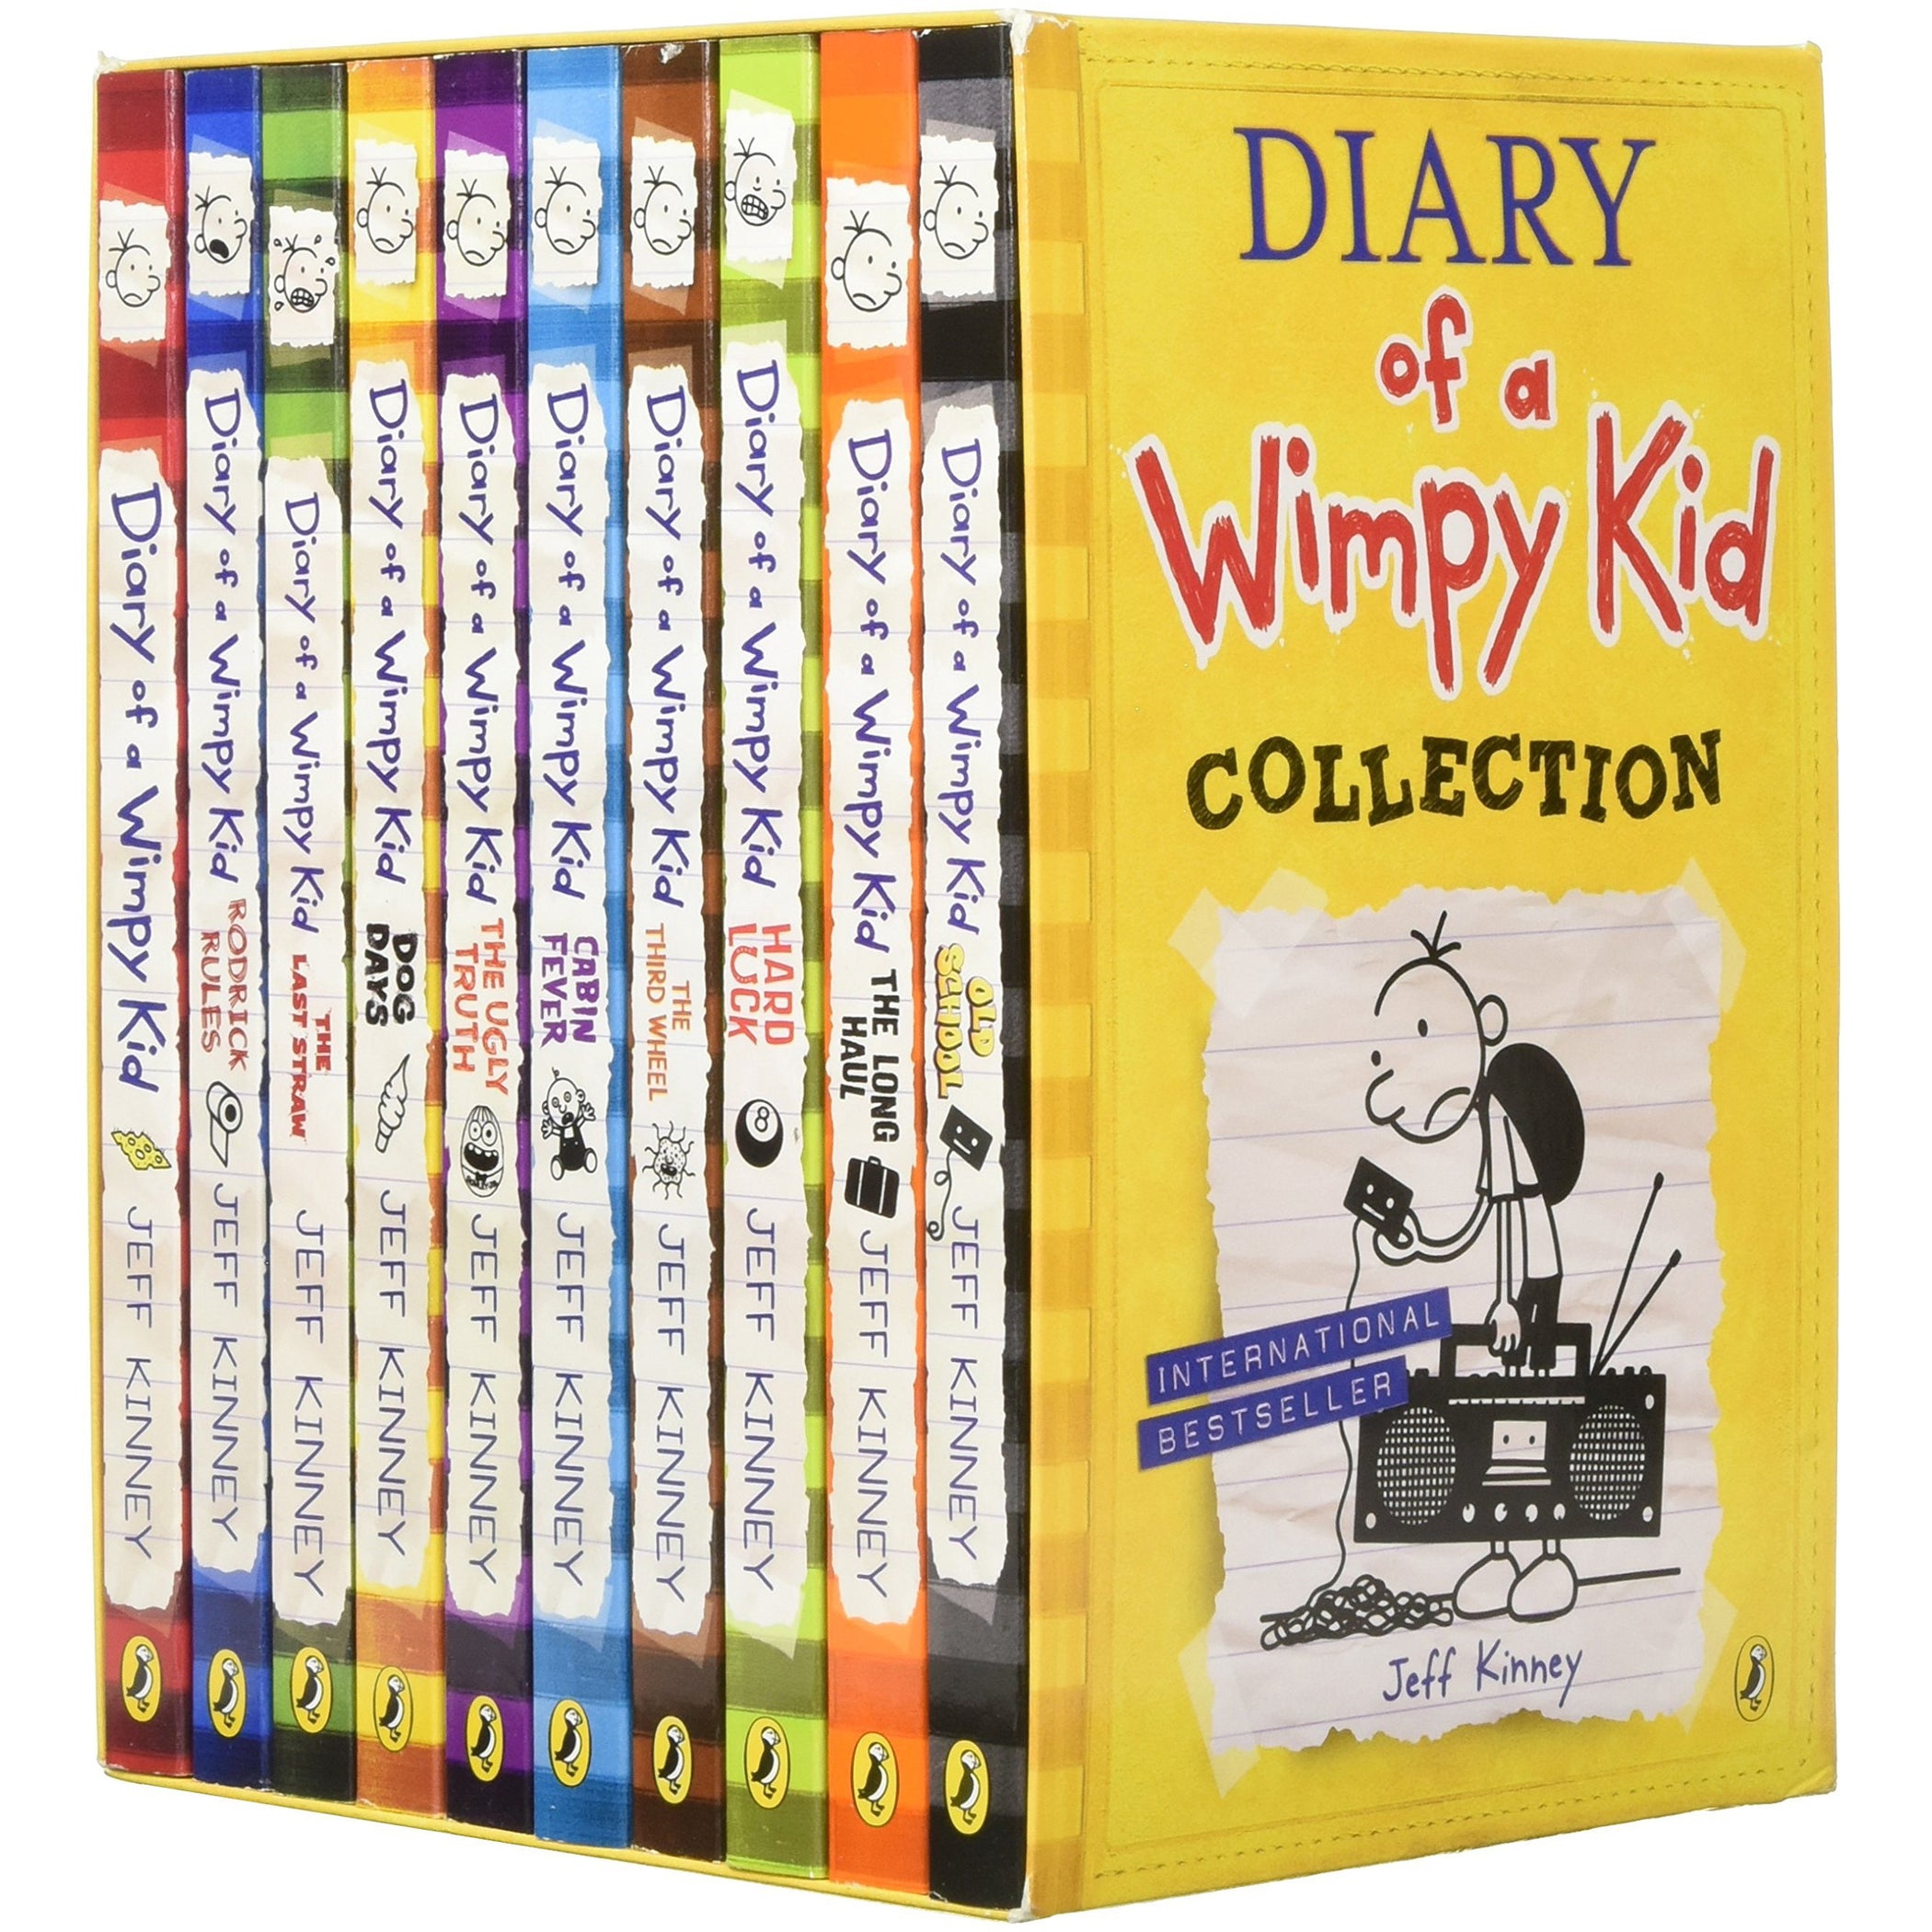 book review for diary of a wimpy kid